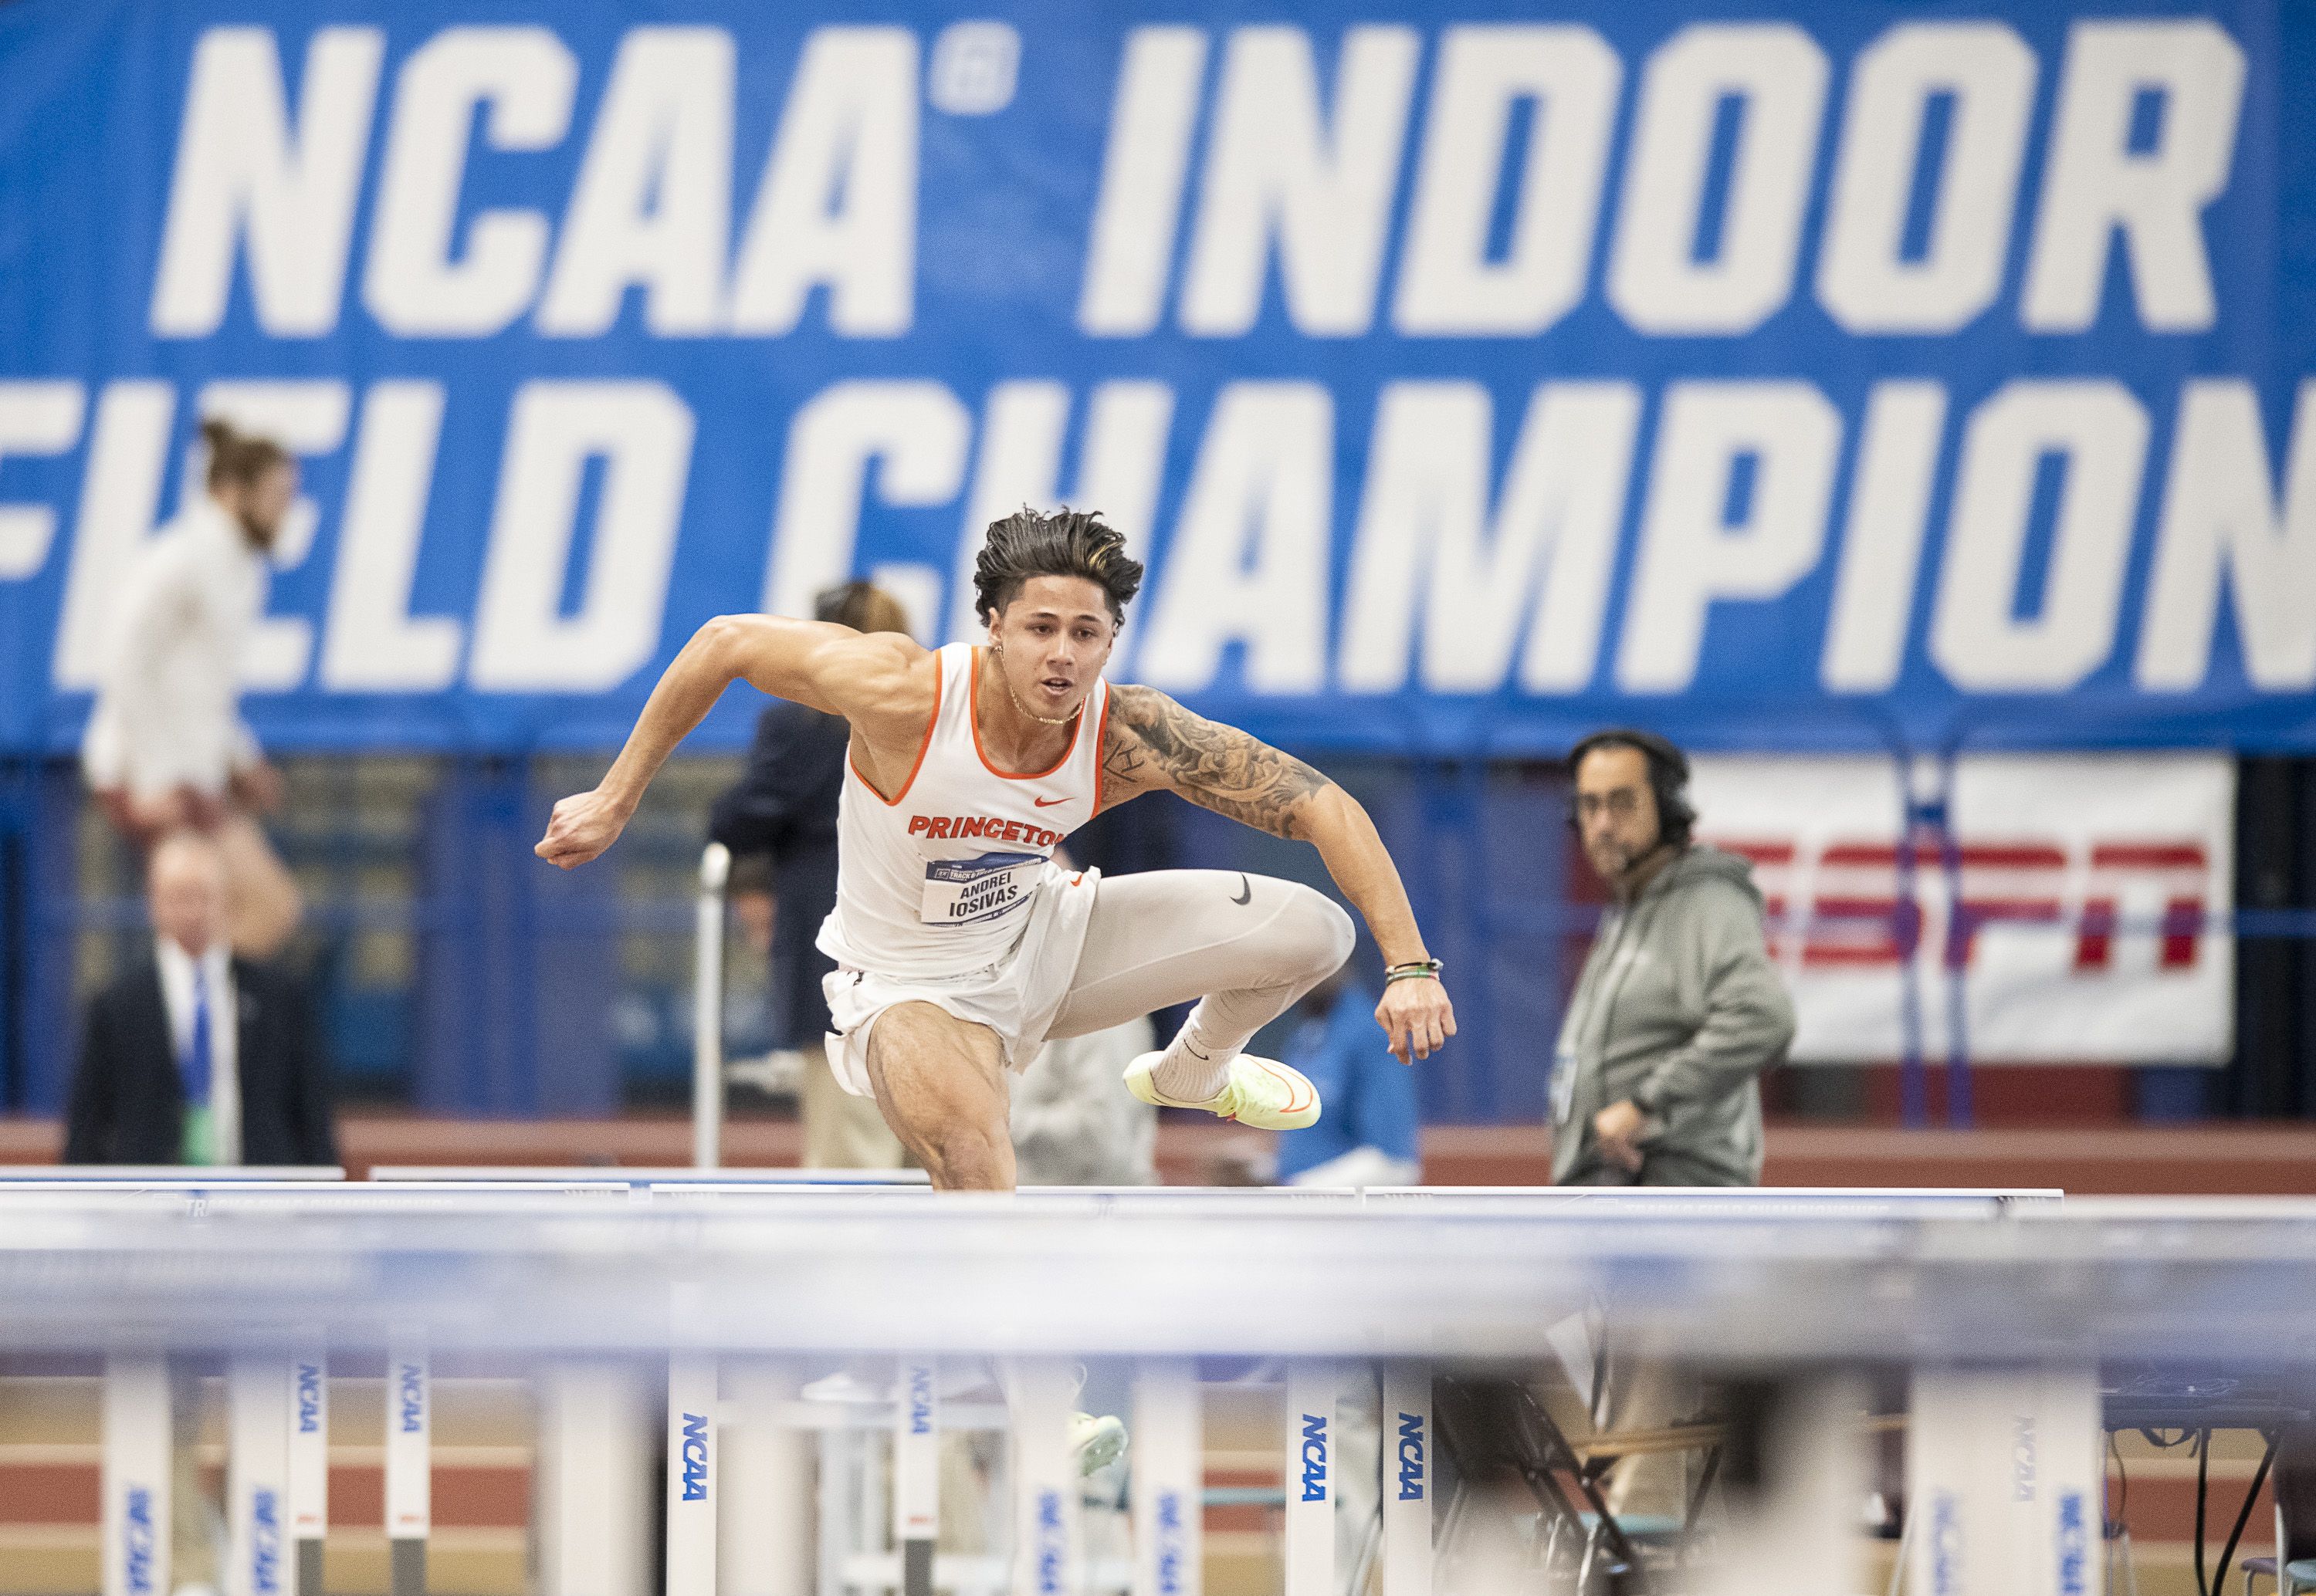 How to Watch the 2023 NCAA Indoor Track and Field Championships